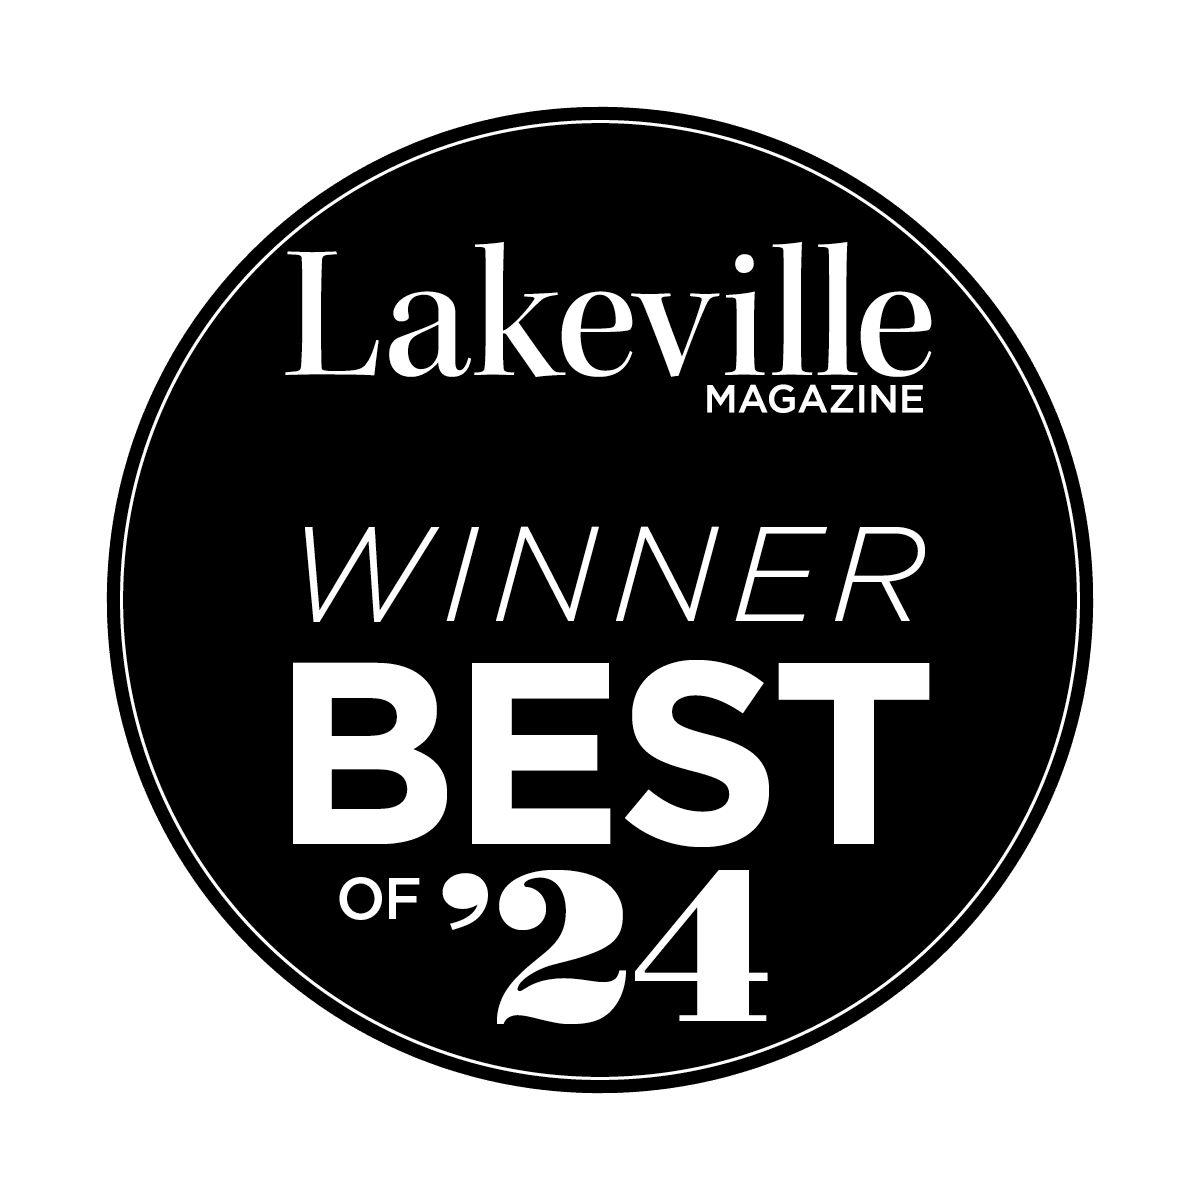 Voted best family practice as voted by the residents in Lakeville